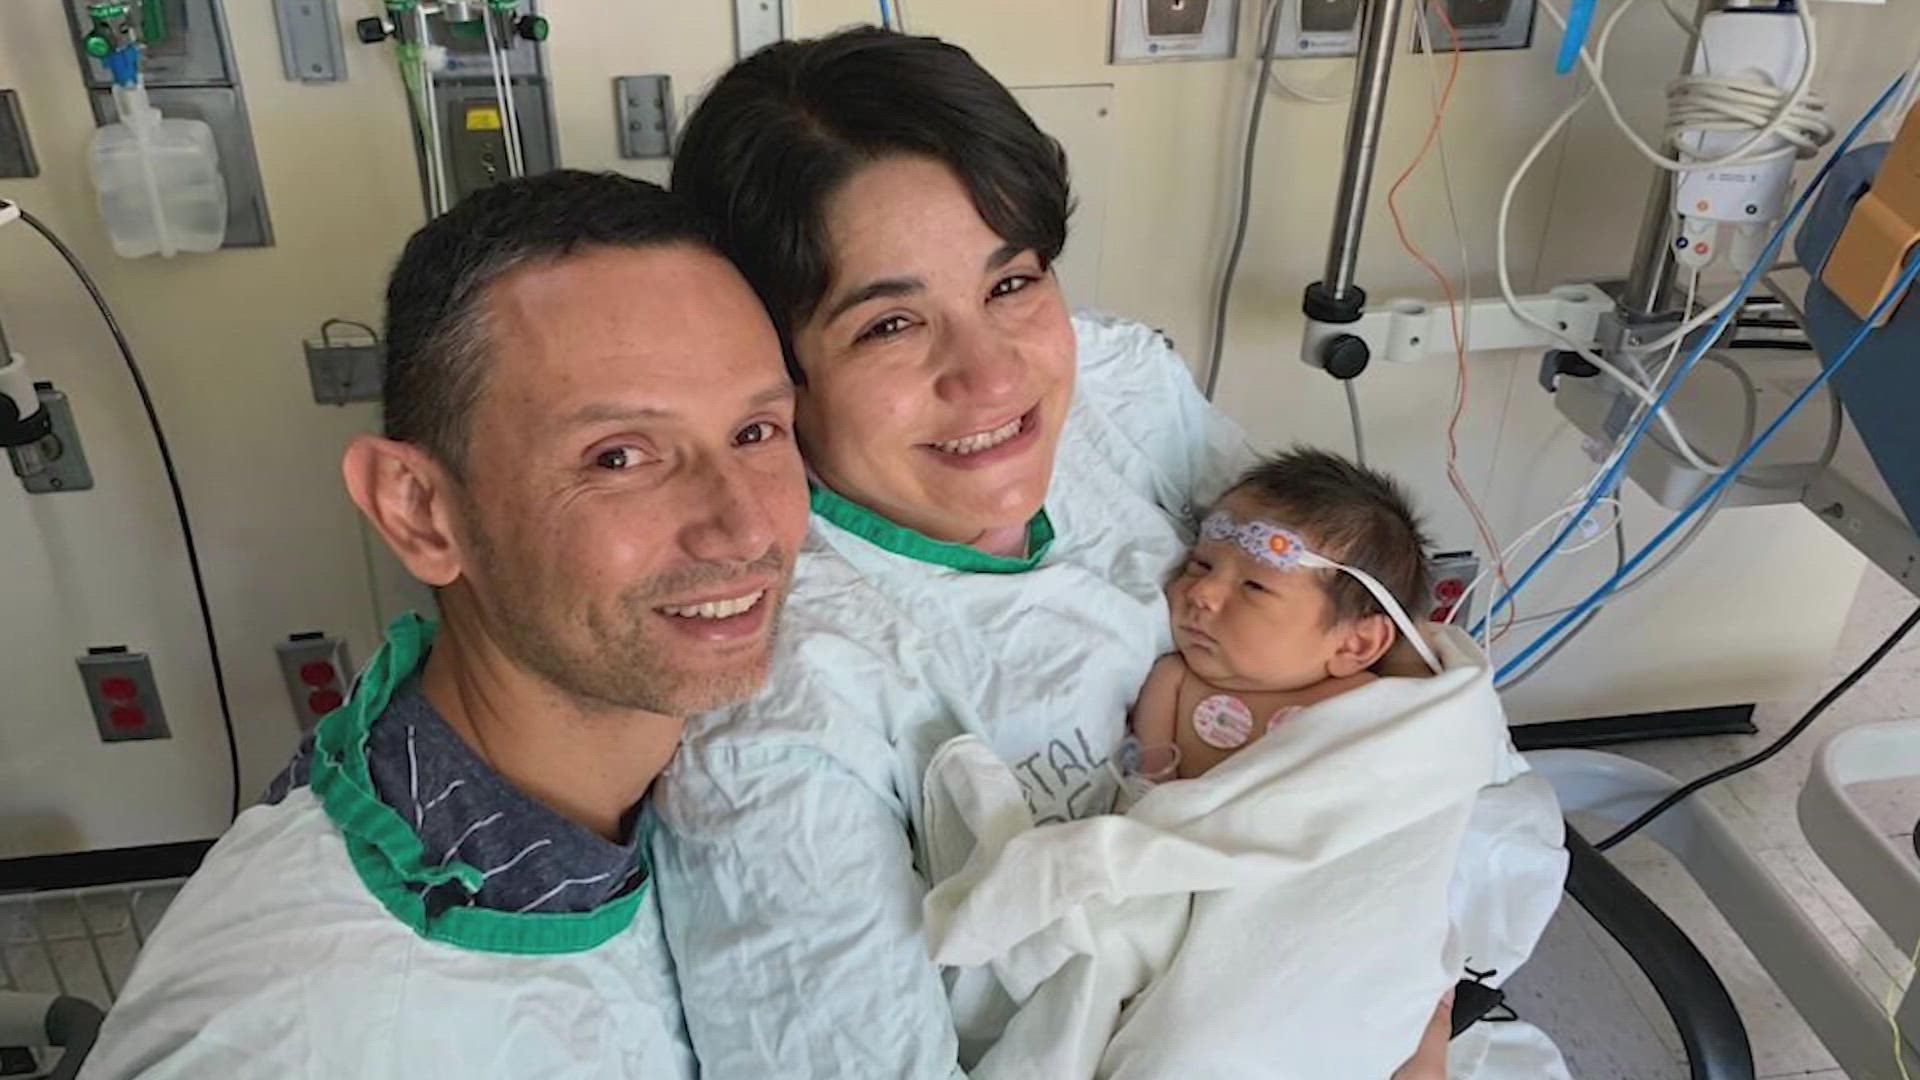 Catherine Castro and her husband, Jorge, had tried for nearly five years to have a baby, and finally, on November 17, Arturo was born.